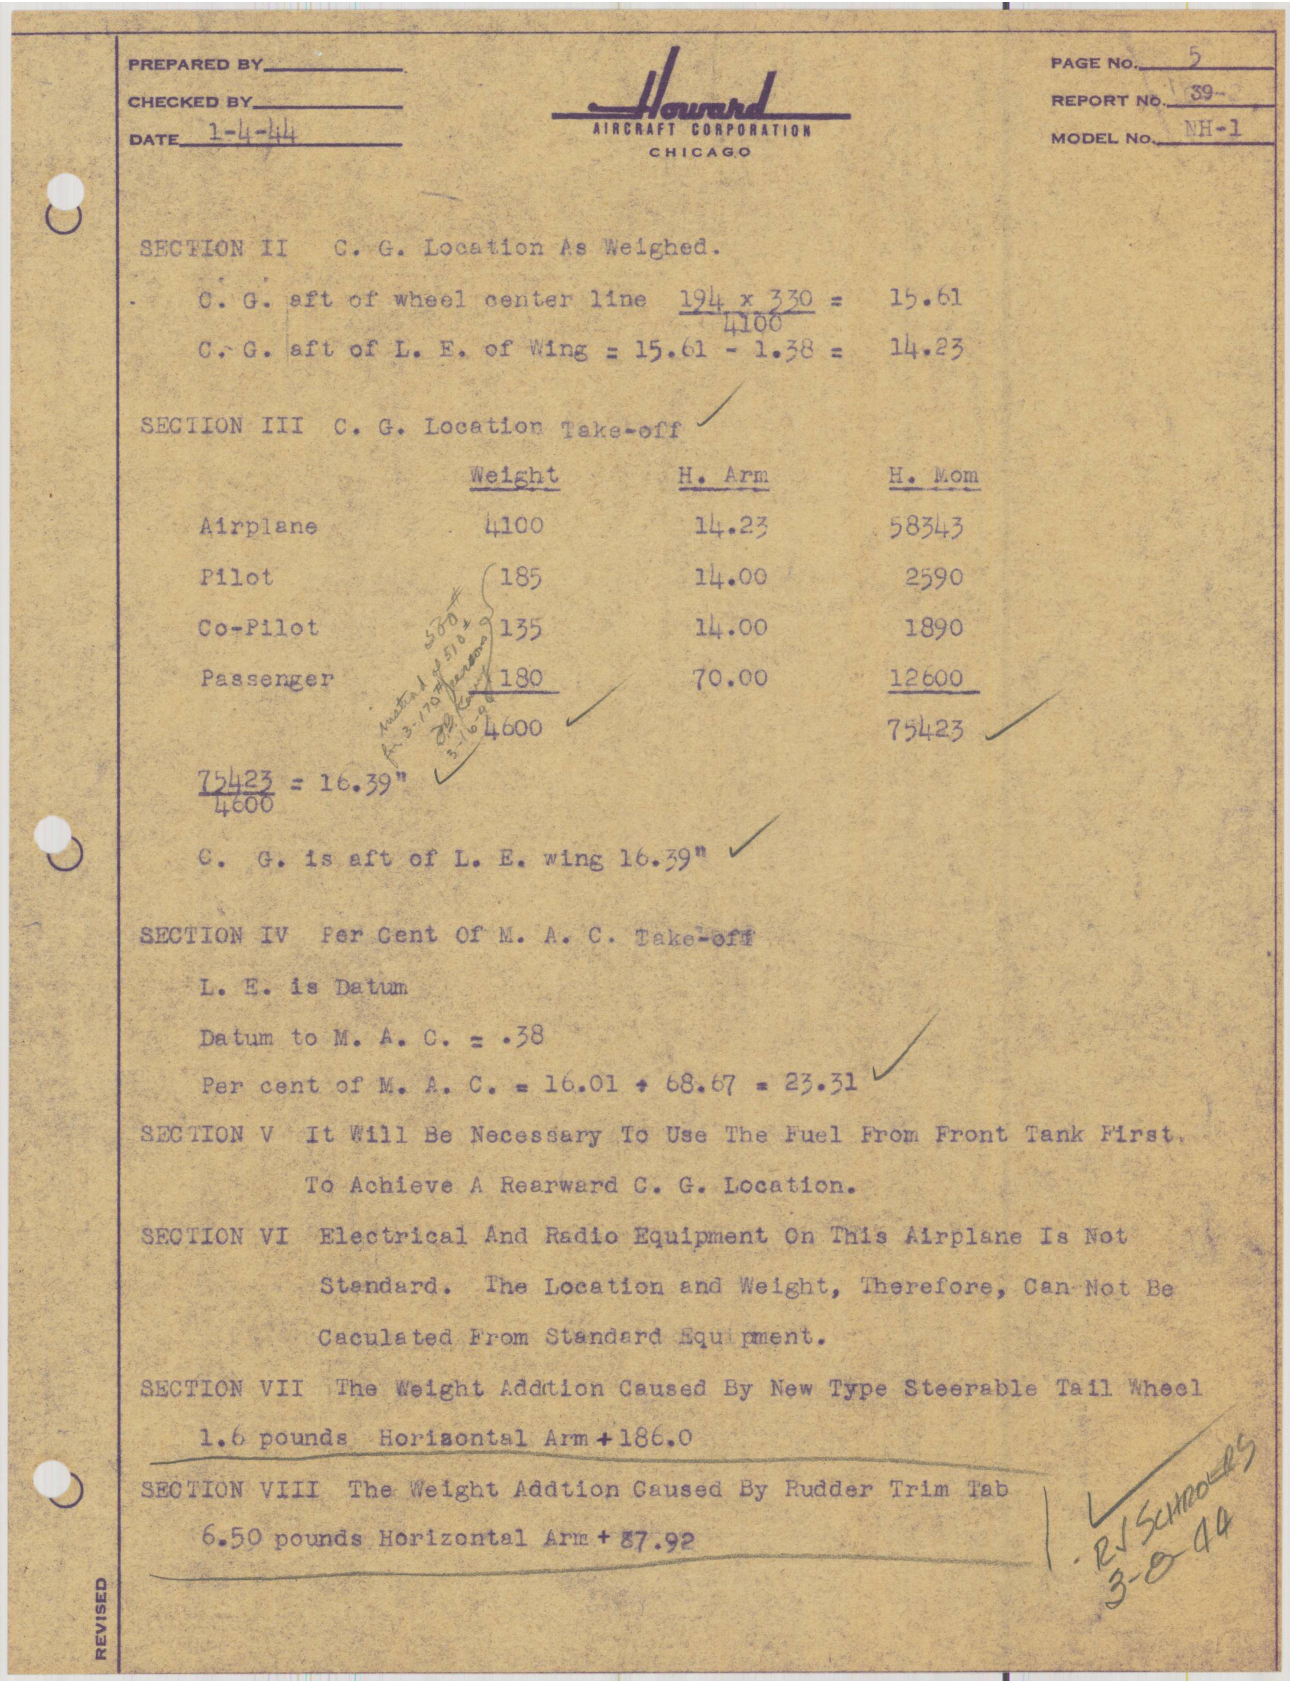 Sample page 6 from AirCorps Library document: Report 39, Flight Test Report, NH-1